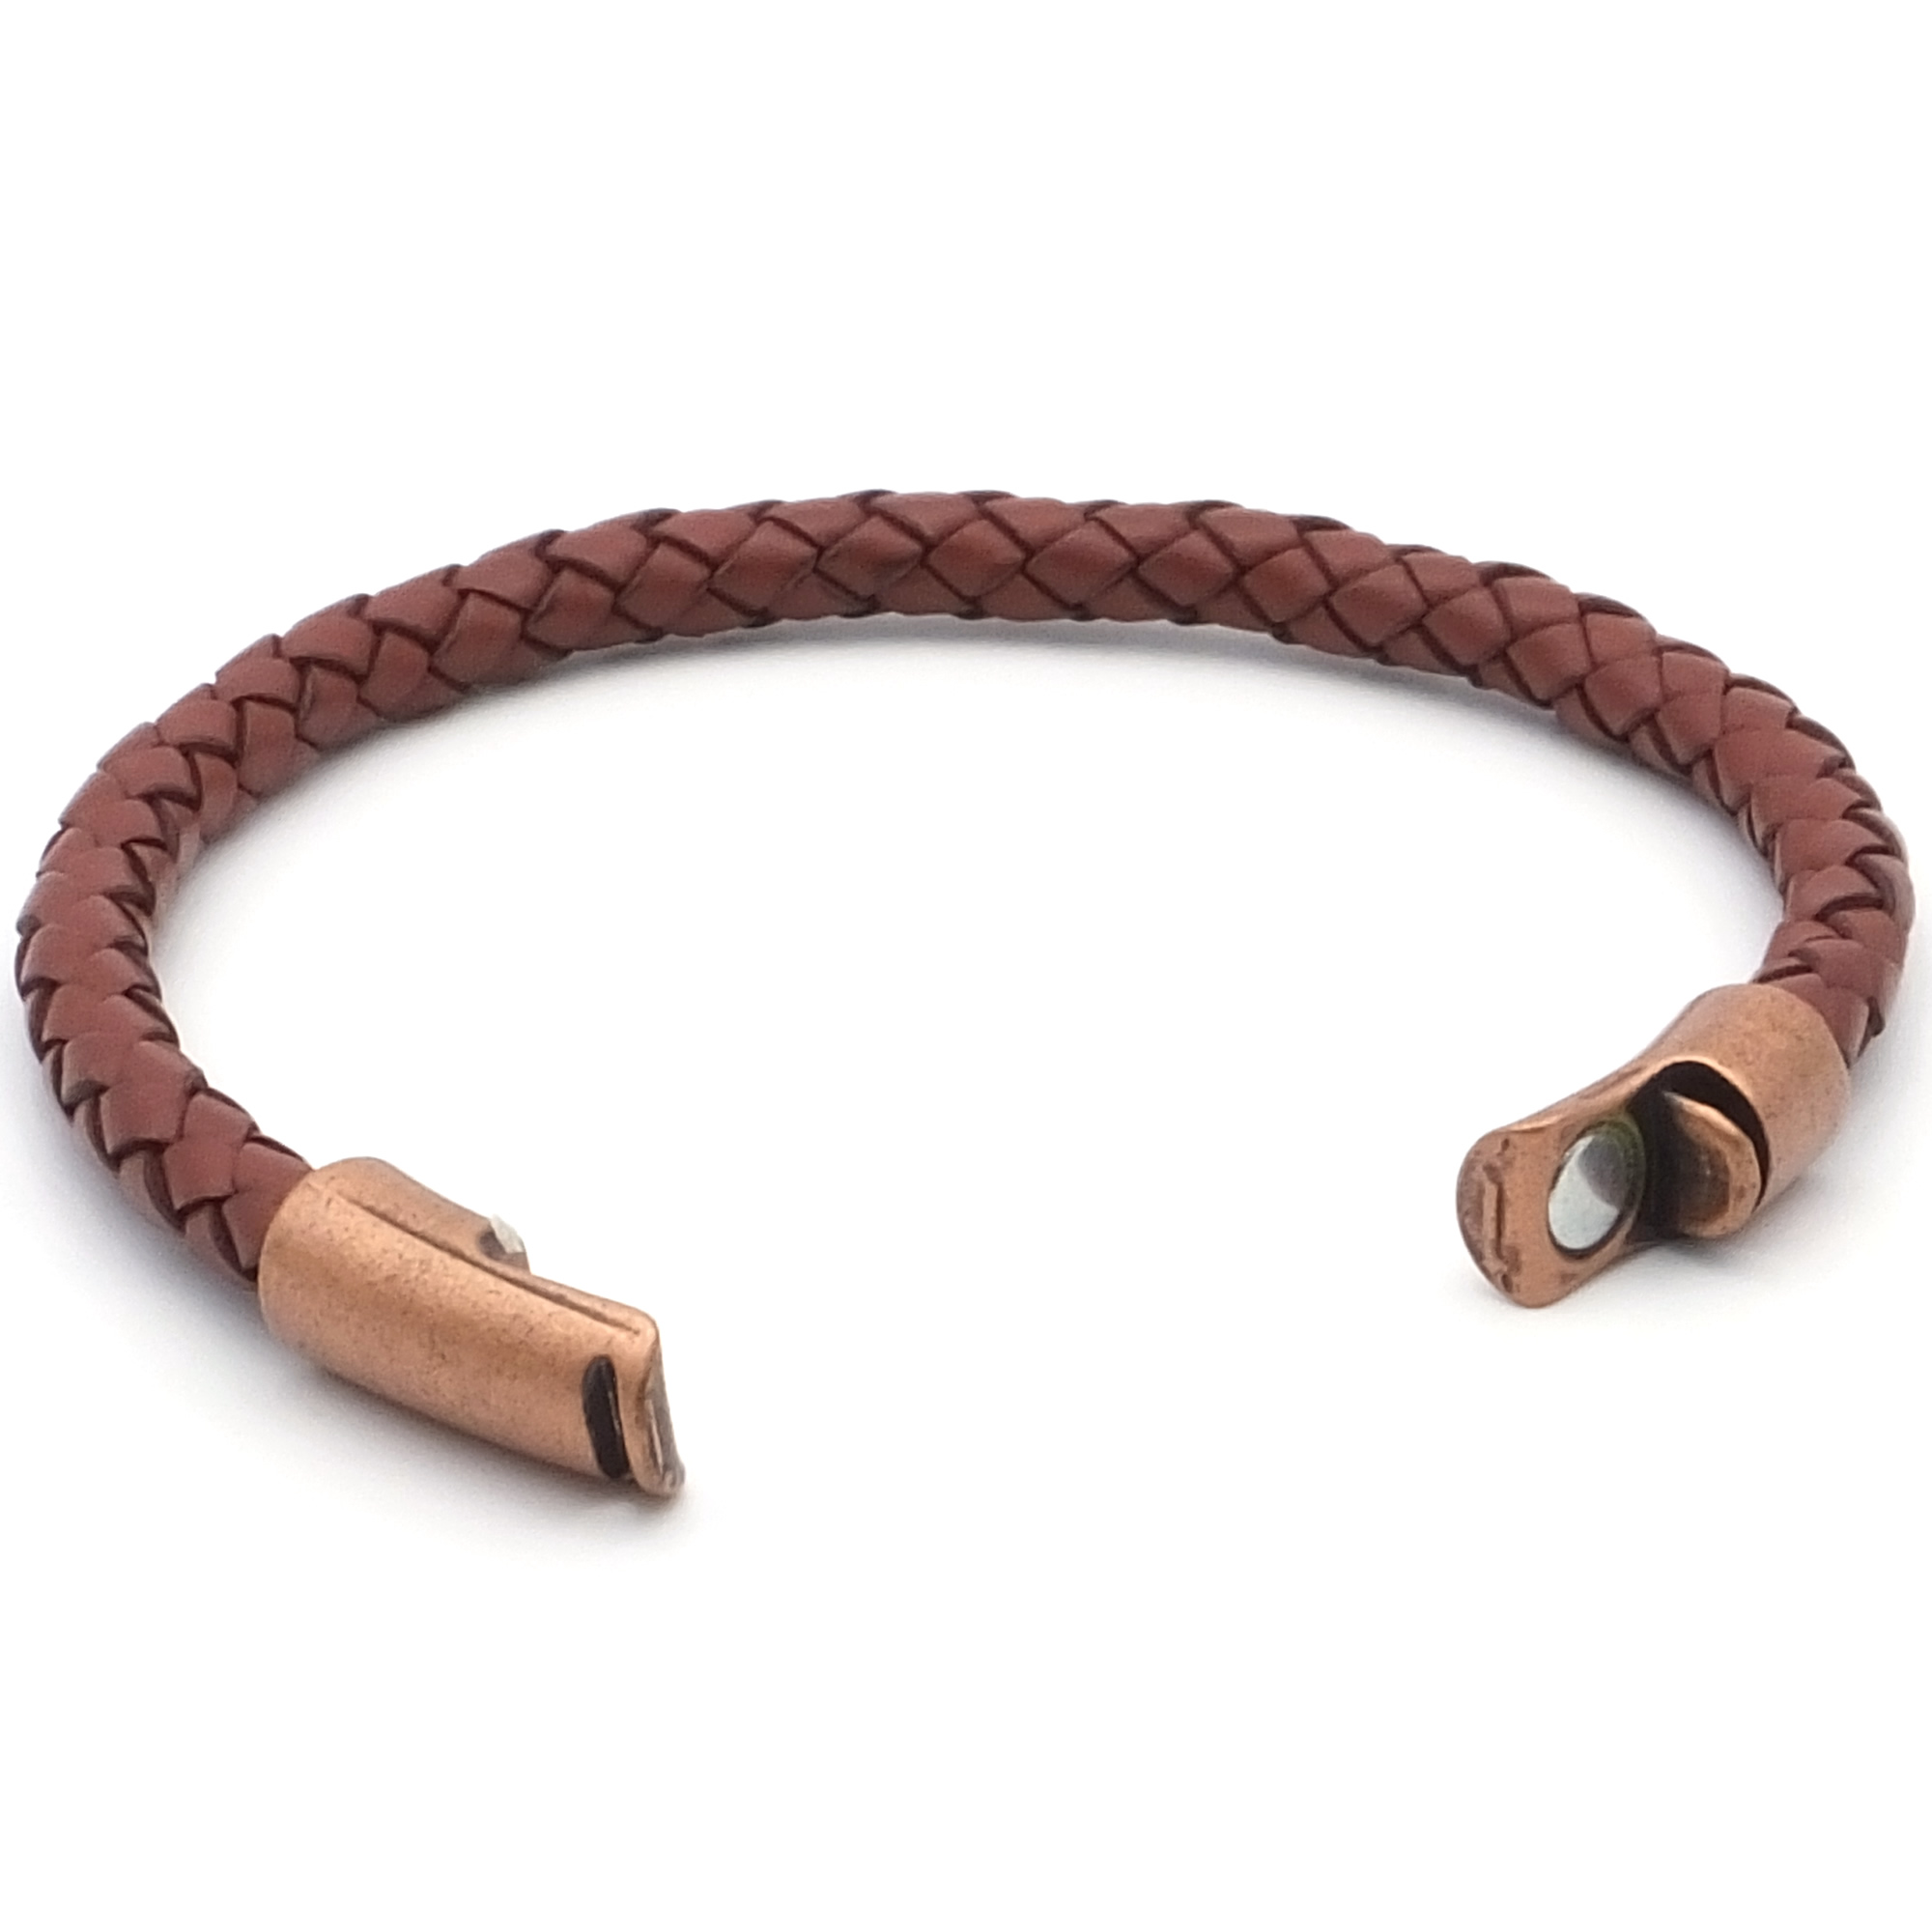 Arizona Leather Bracelet with Magnetic Antique Copper Clasp